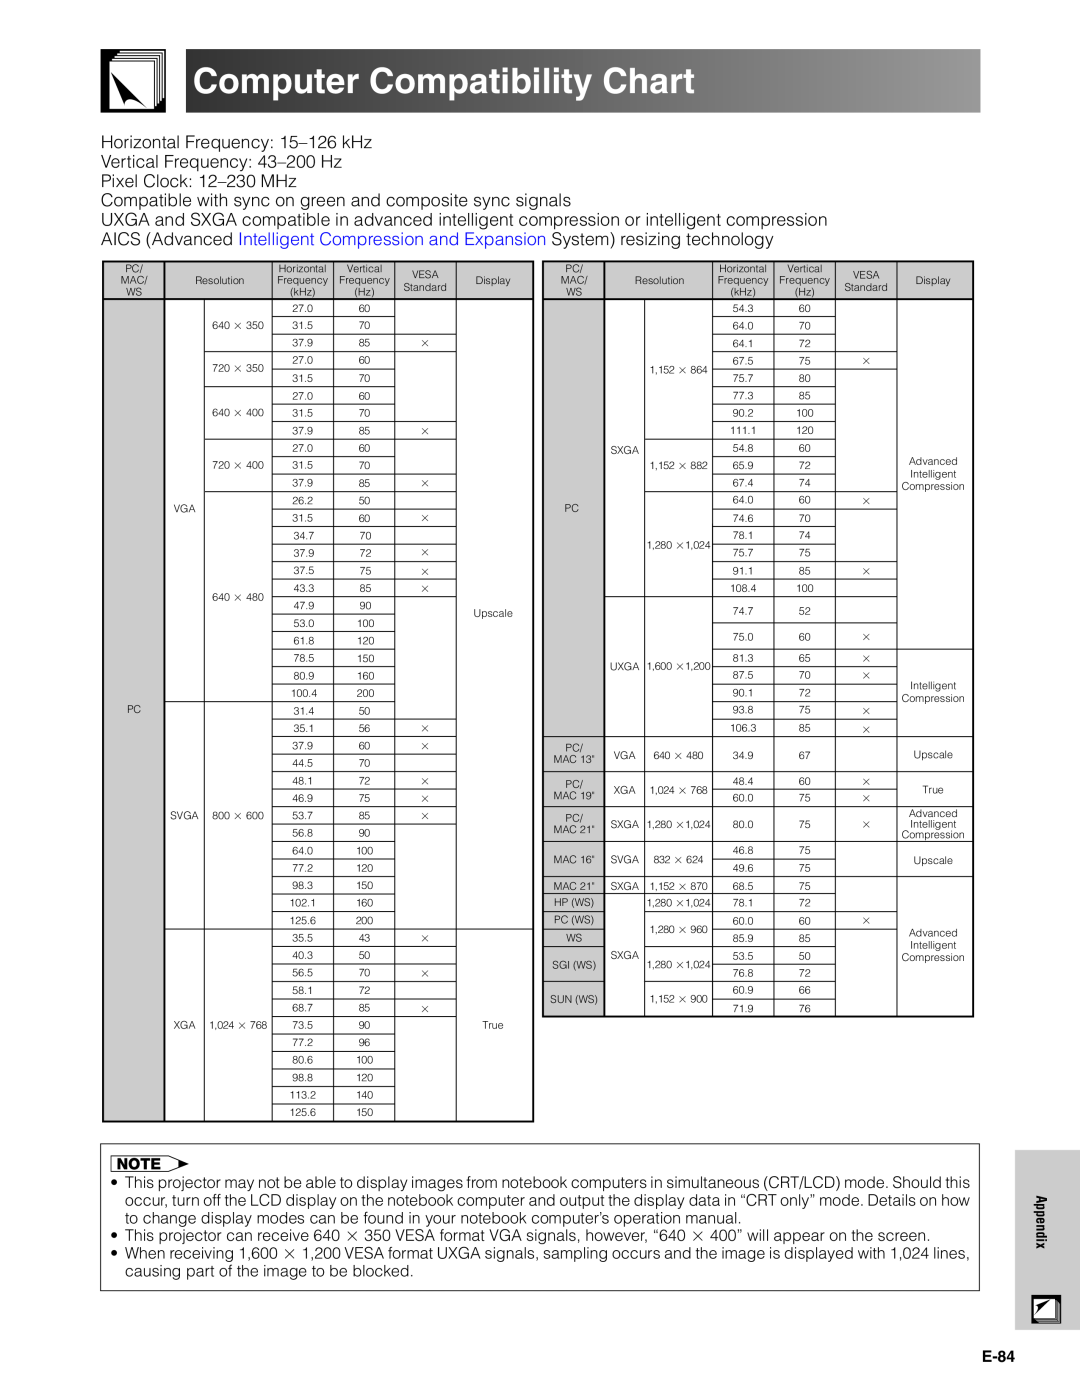 Sharp XG-V10XU operation manual Computer Compatibility Chart, Horizontal Frequency 15-126 kHz Vertical Frequency 43-200 Hz 